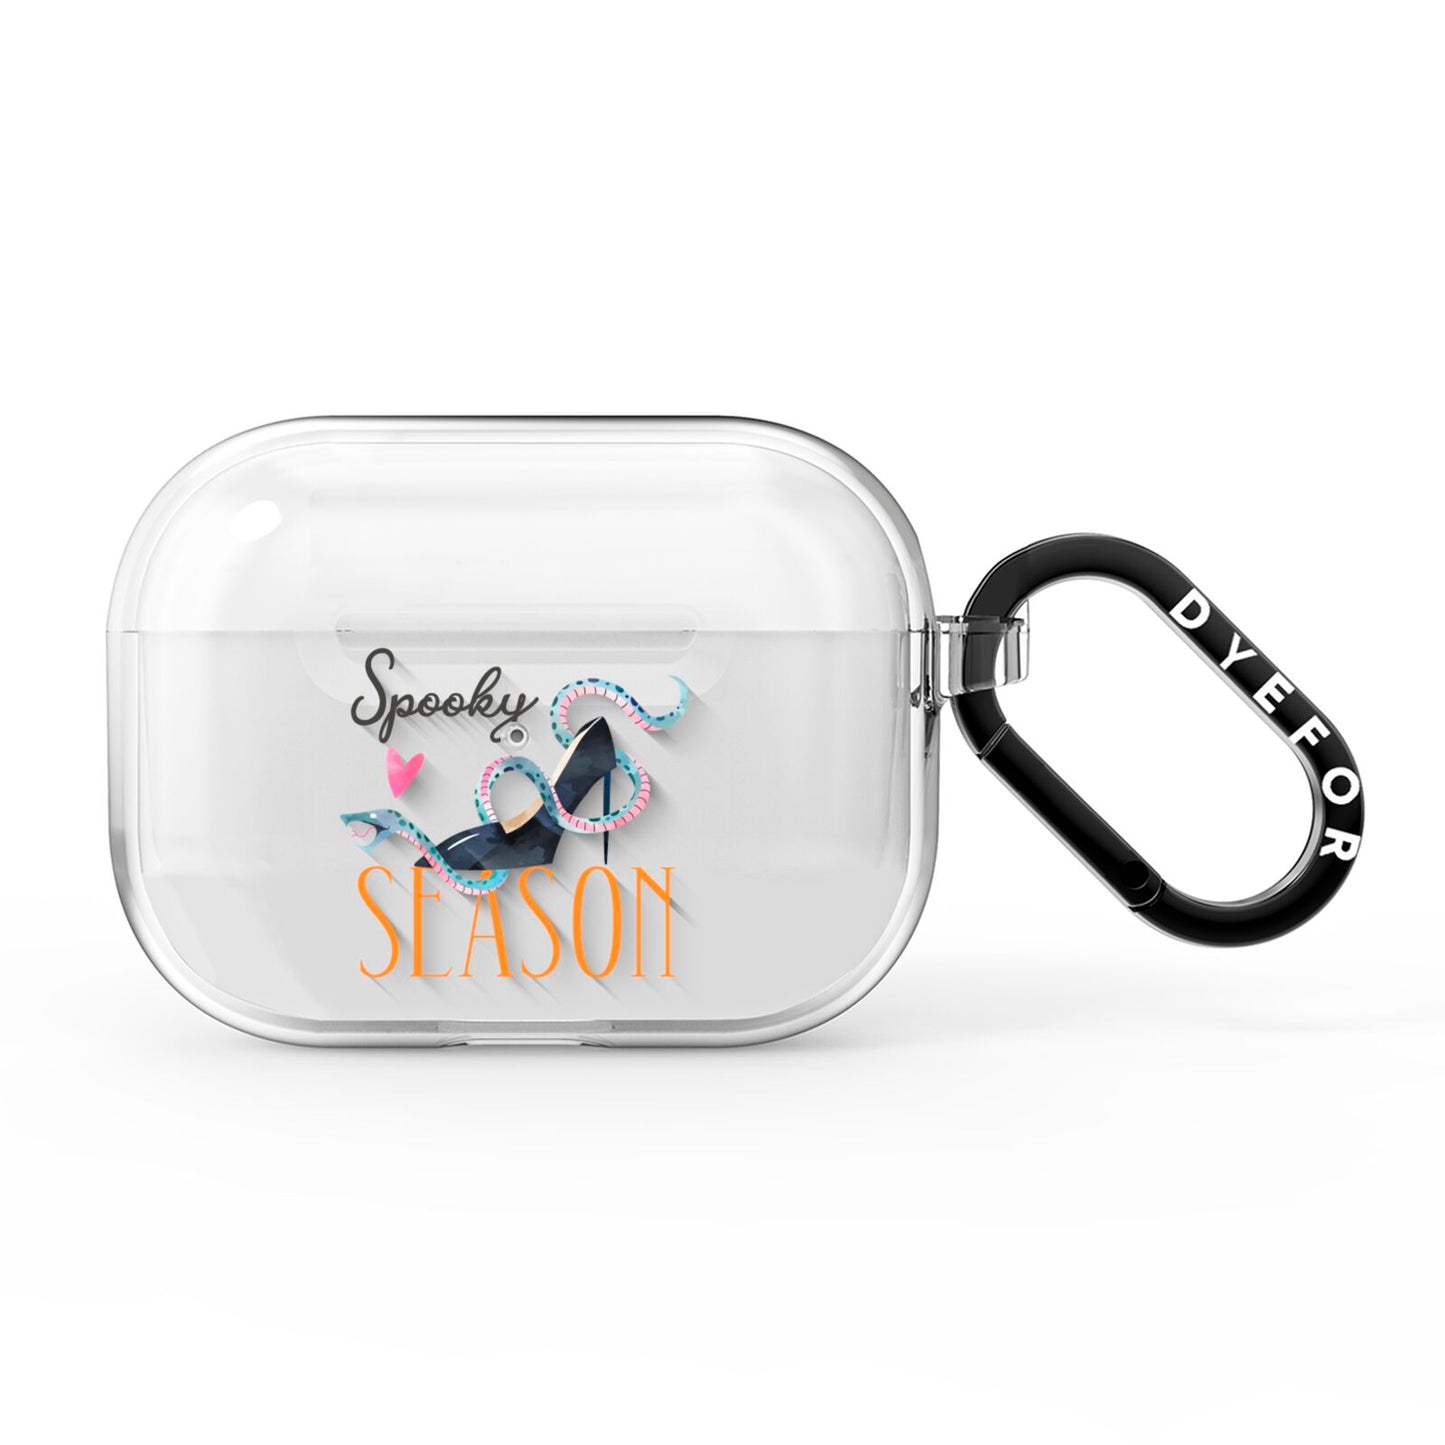 Fun Halloween Catchphrases and Watercolour Illustrations AirPods Pro Clear Case